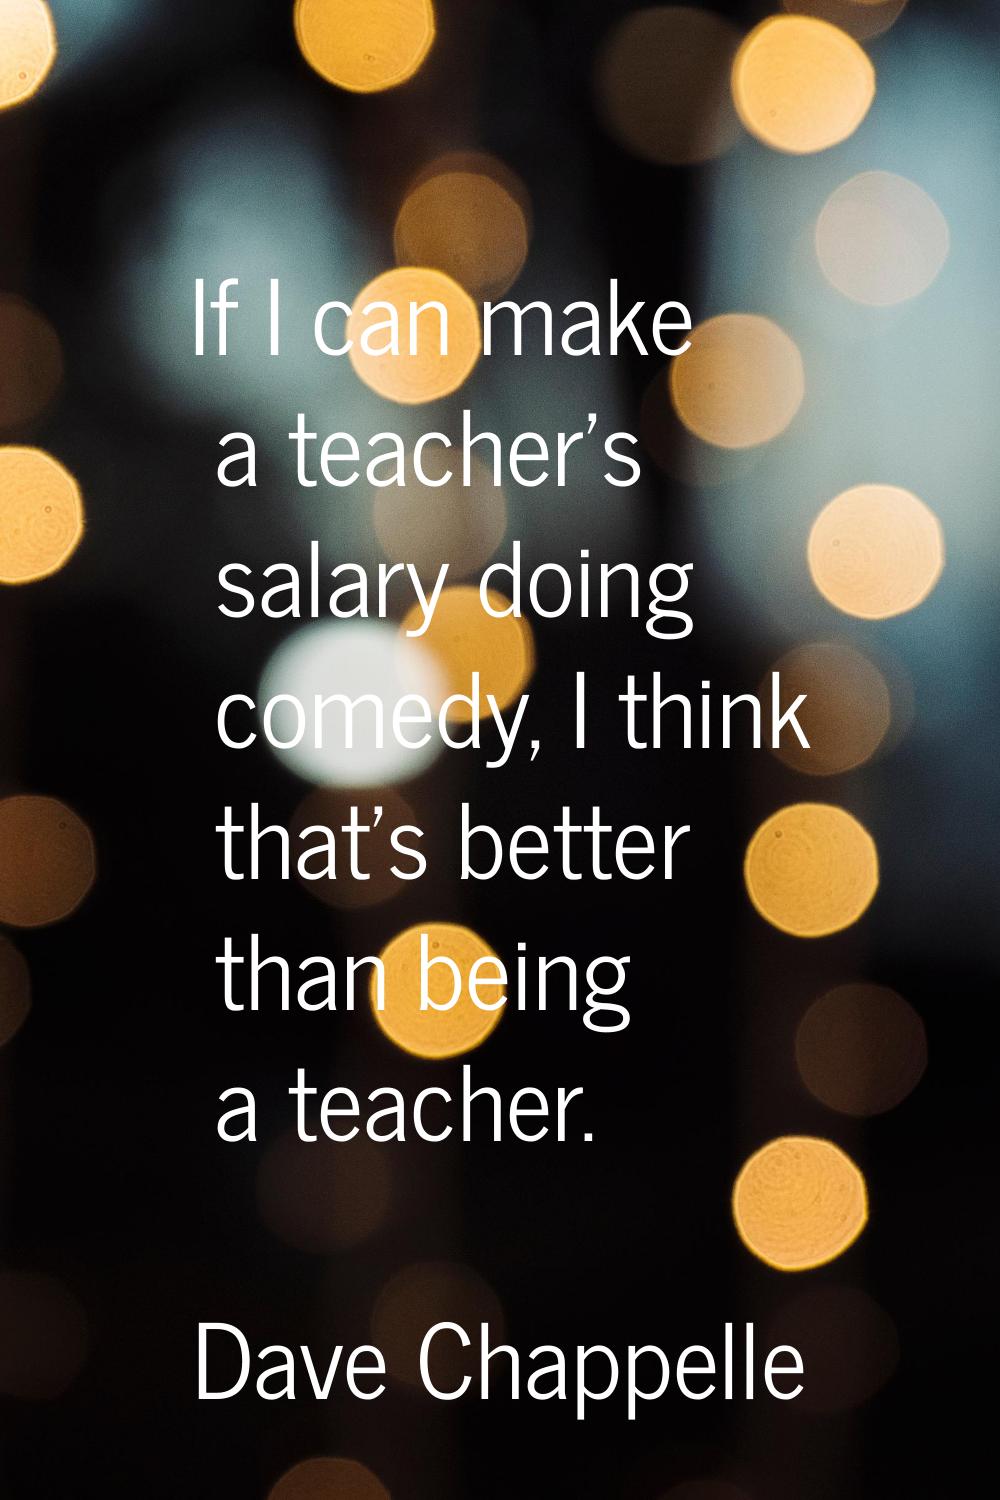 If I can make a teacher's salary doing comedy, I think that's better than being a teacher.